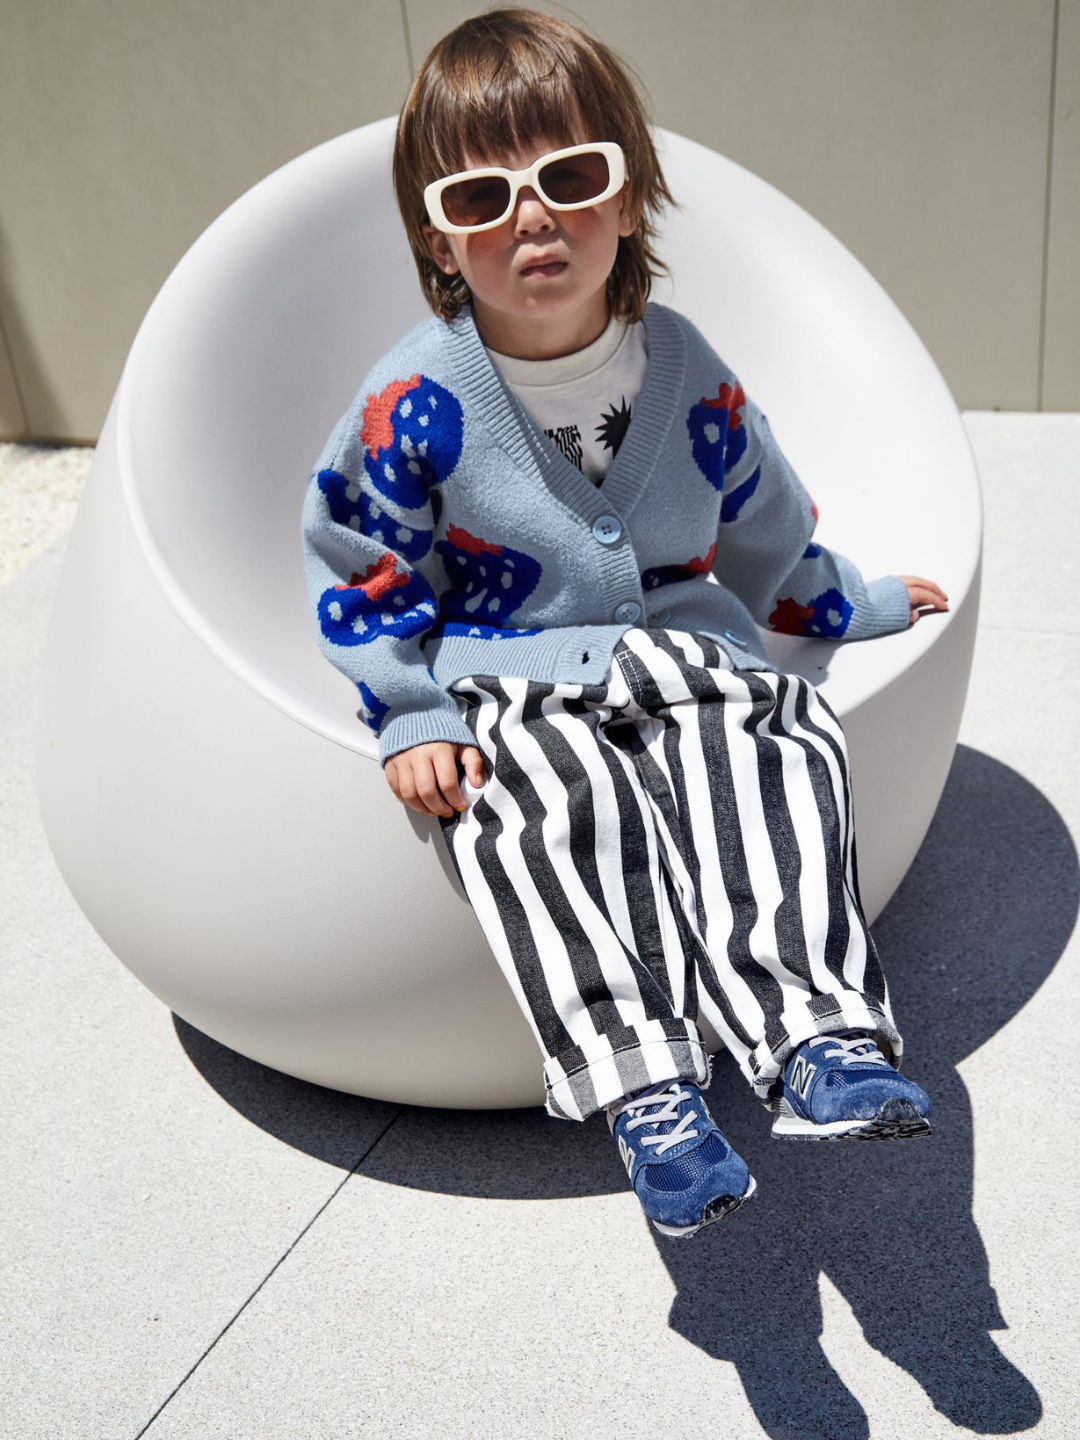 Sky | A child wearing a kids v-neck cardigan in light blue with an all-over pattern of large blue strawberries with a red leaf. He is seated on a round white chair in a paved outdoor space.